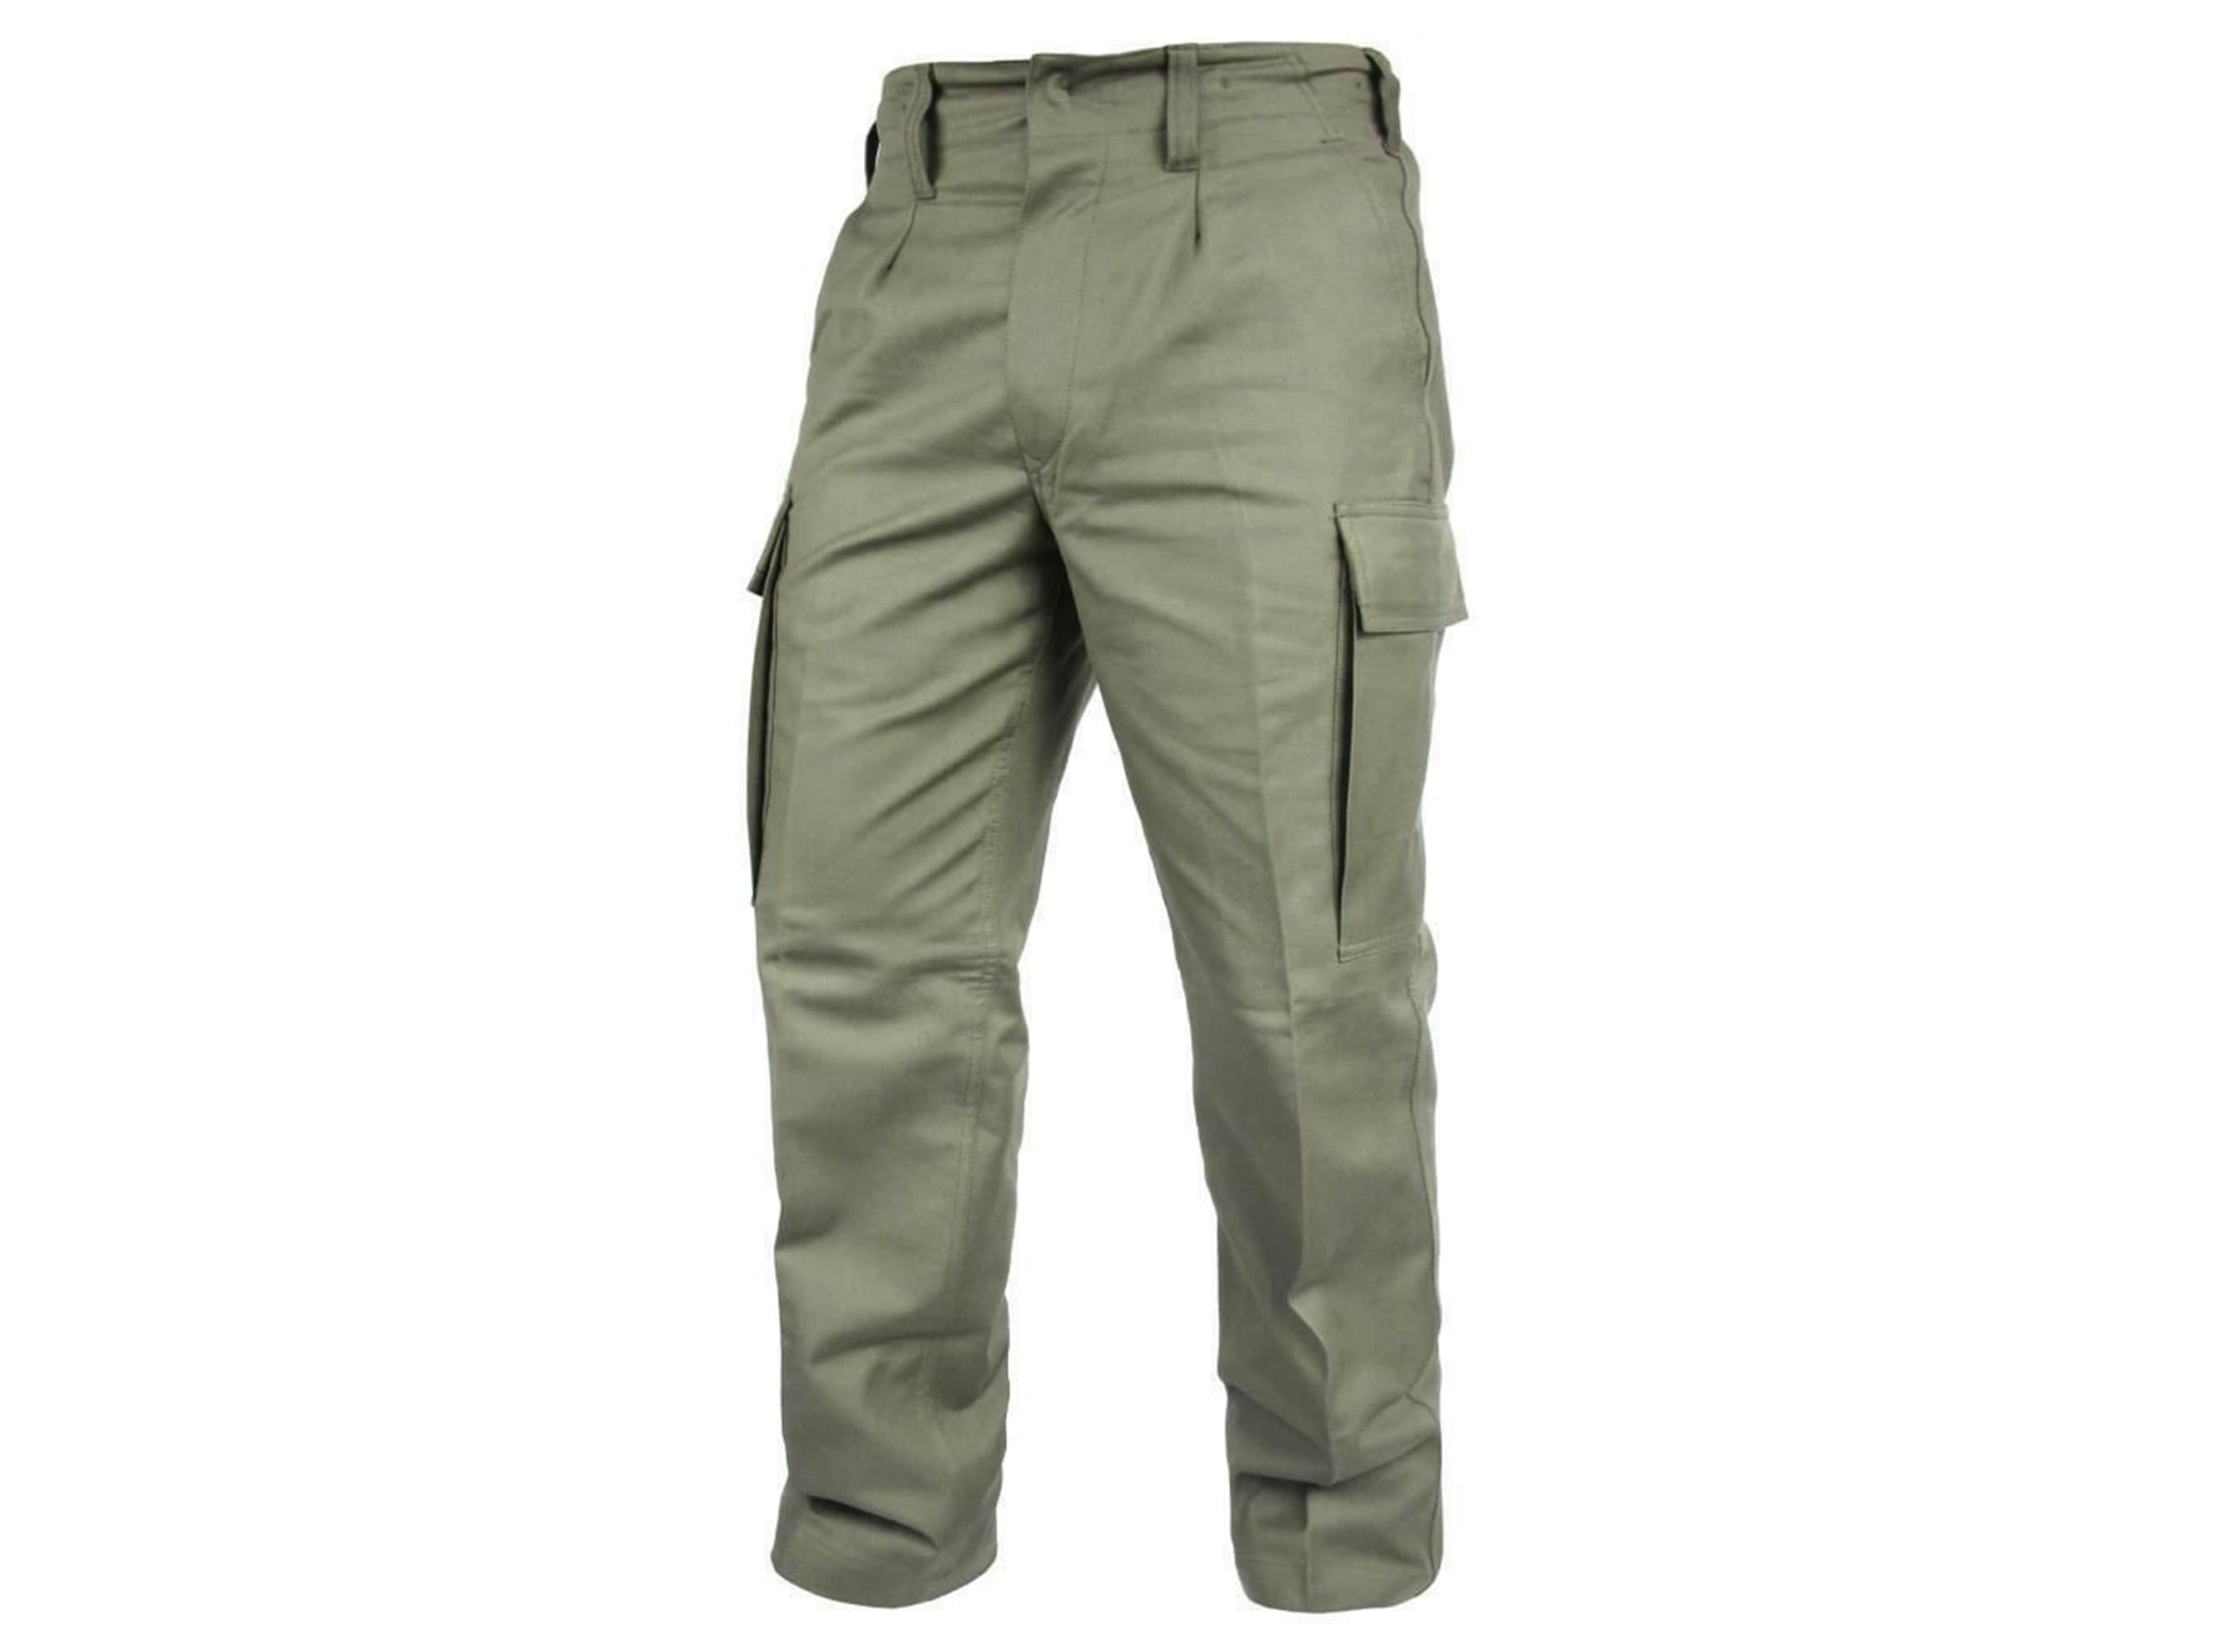 British Army PCS Combat Trousers Olive Green